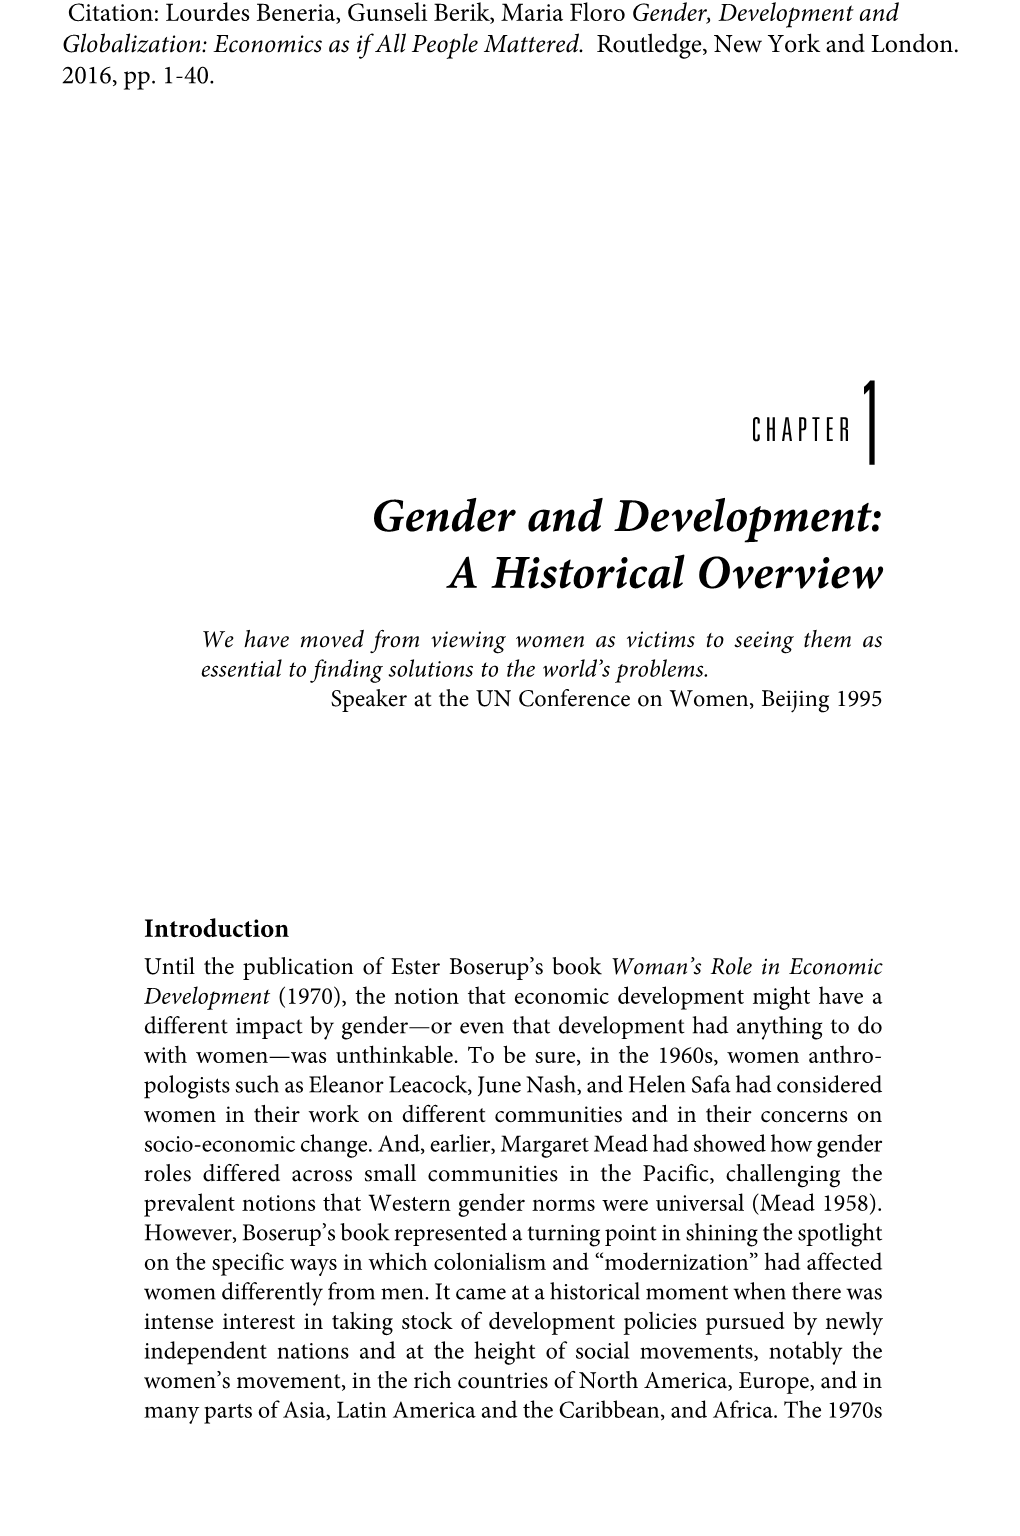 Gender and Development: a Historical Overview